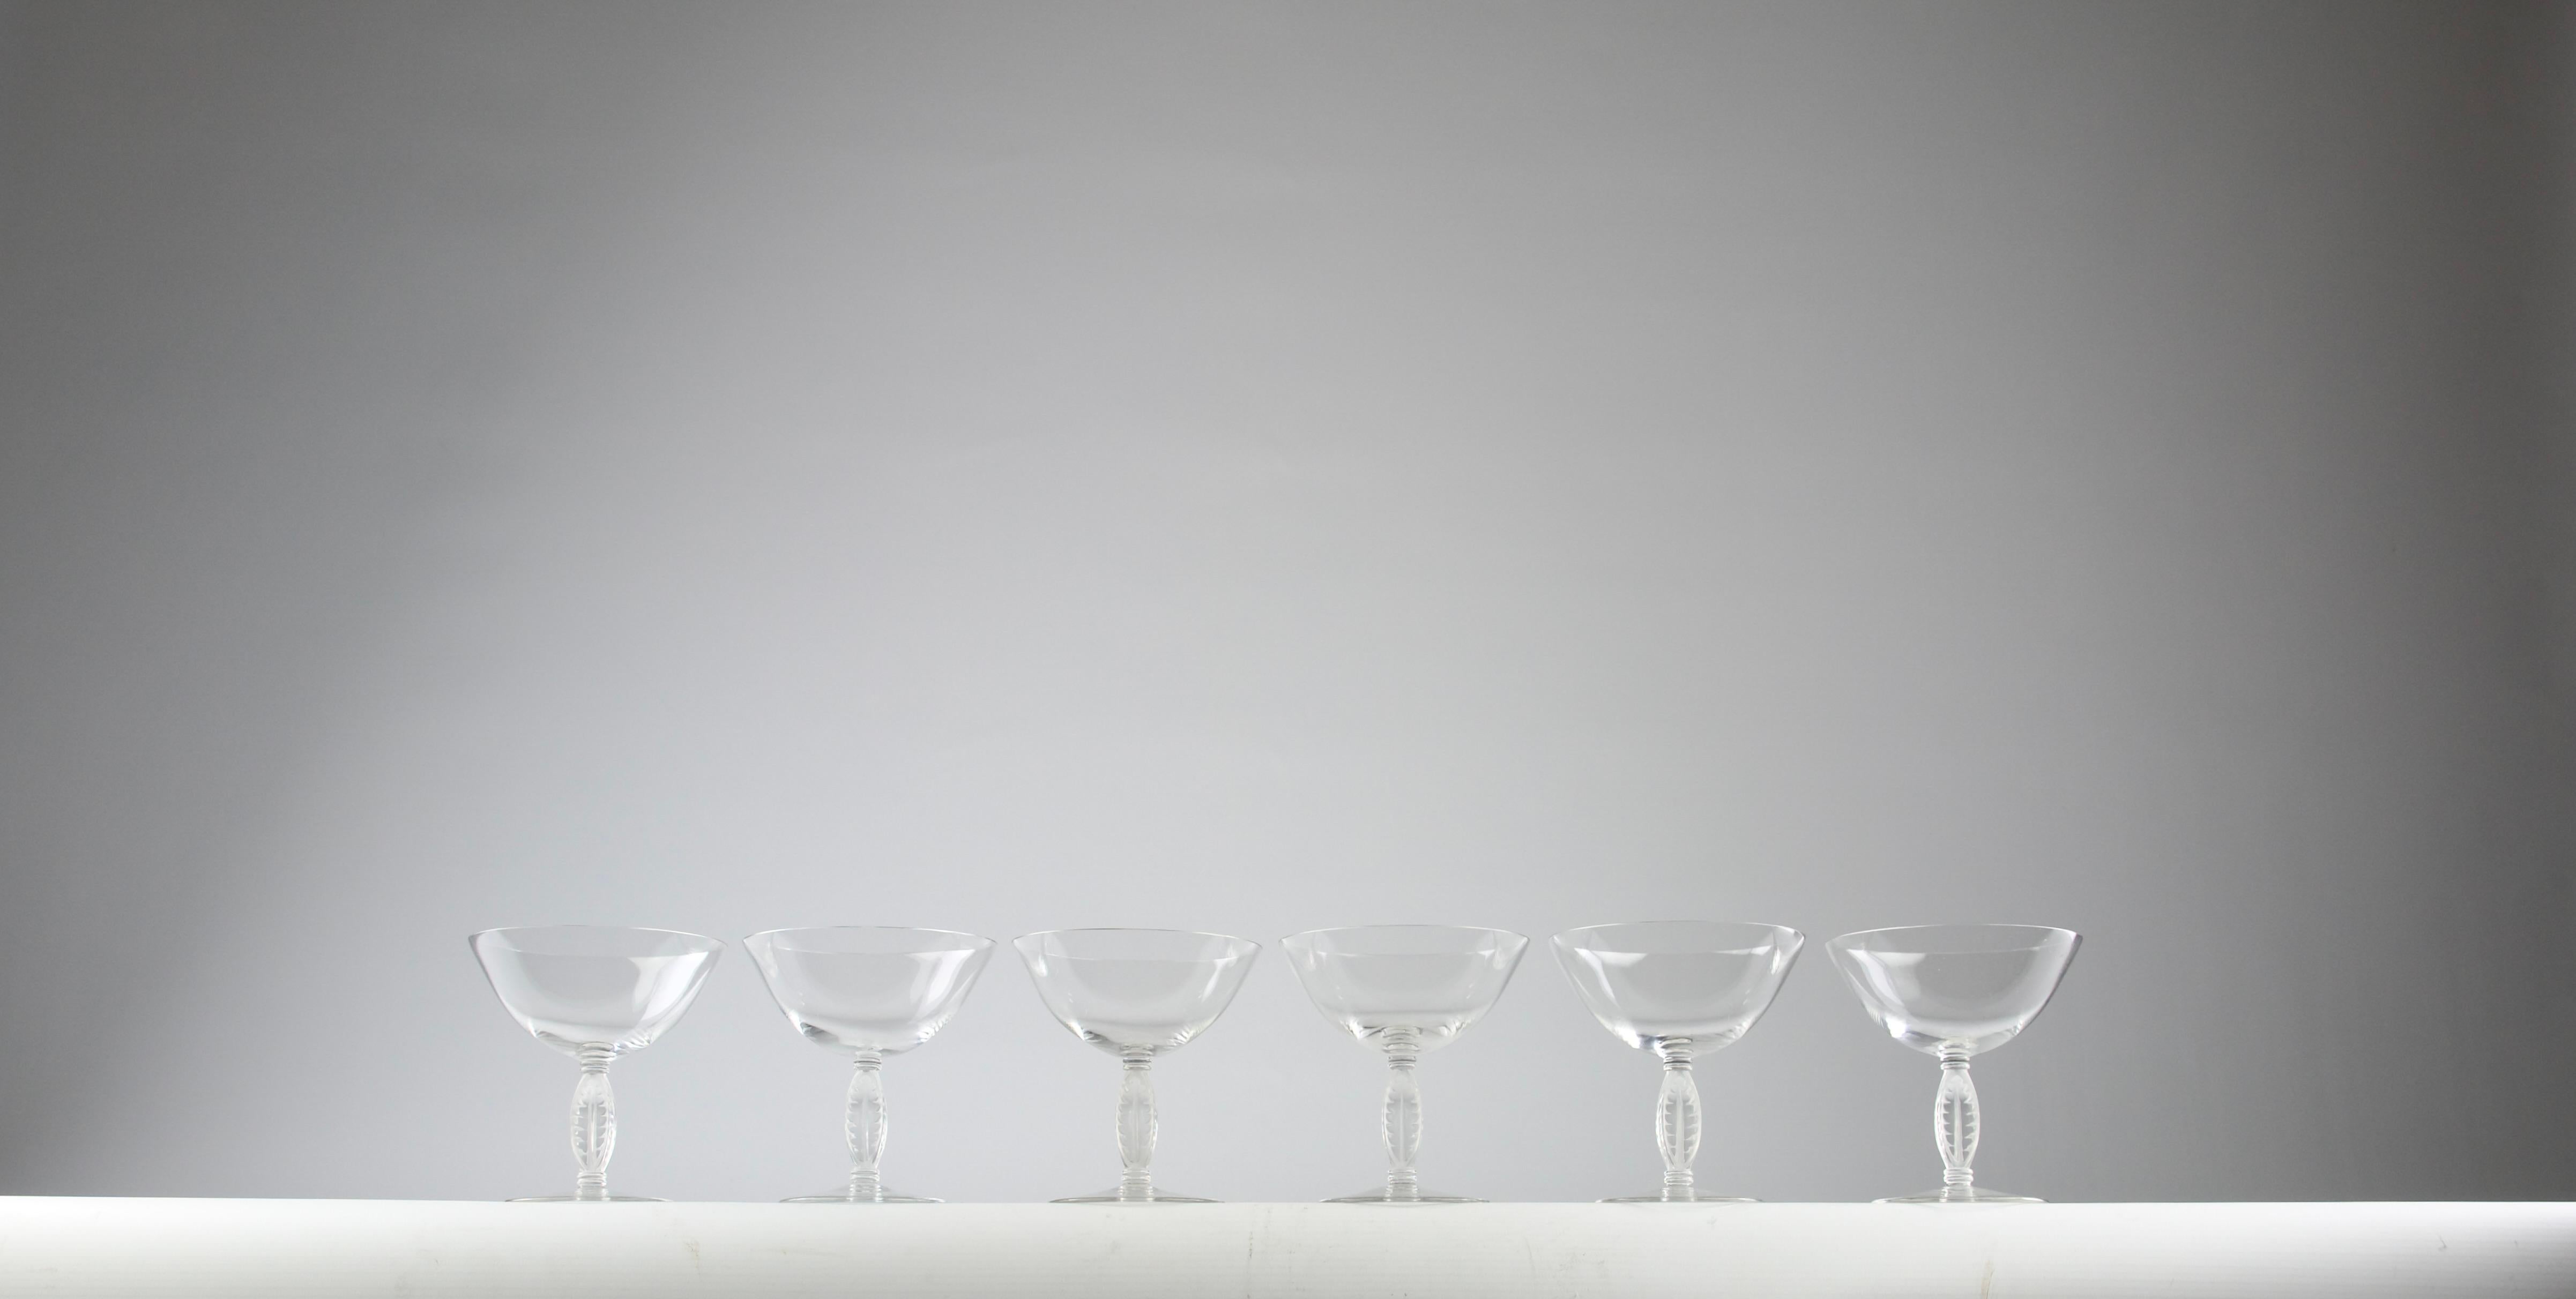 Beautiful Lalique Fontainebleau champagne set of six. Other wine glasses from the same collection are available in the shop.

In very good condition.

Dimensions in cm ( H x D ) : 11.2 x 10.5

Secure shipping.

First designed by Rene Lalique in